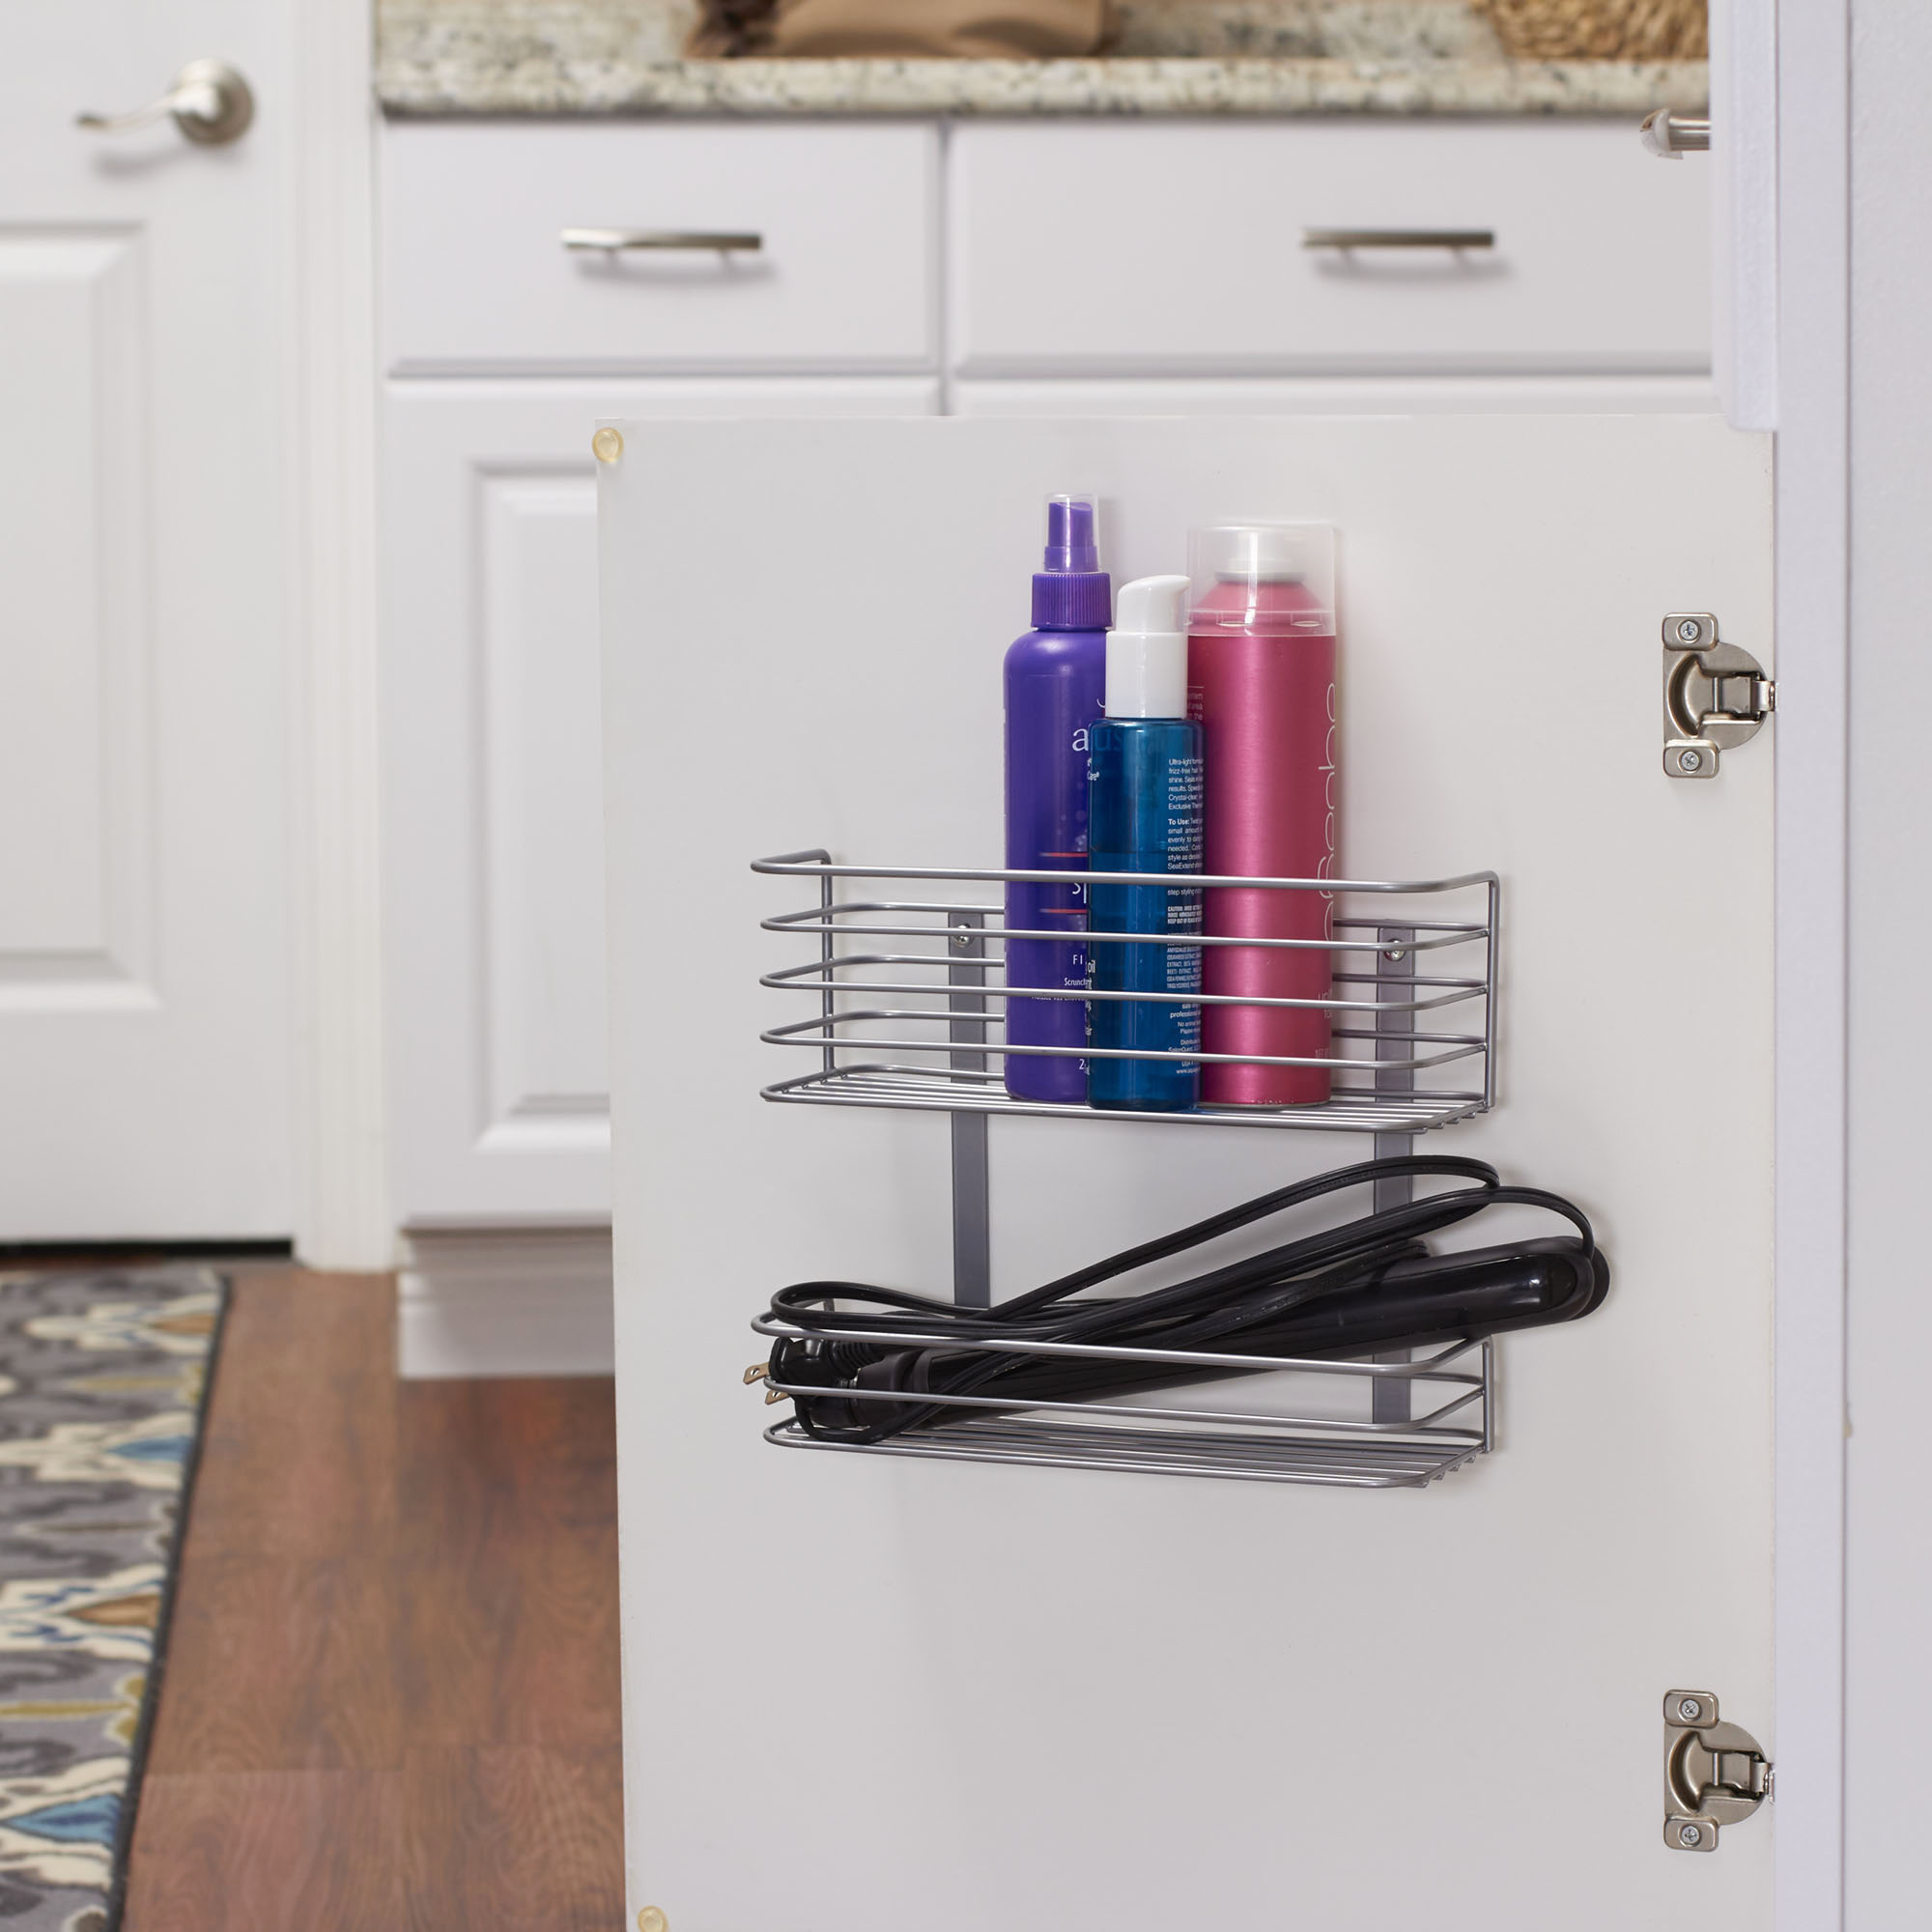 11 Best Under the Sink Organizers for the Bathroom and Kitchen 2022